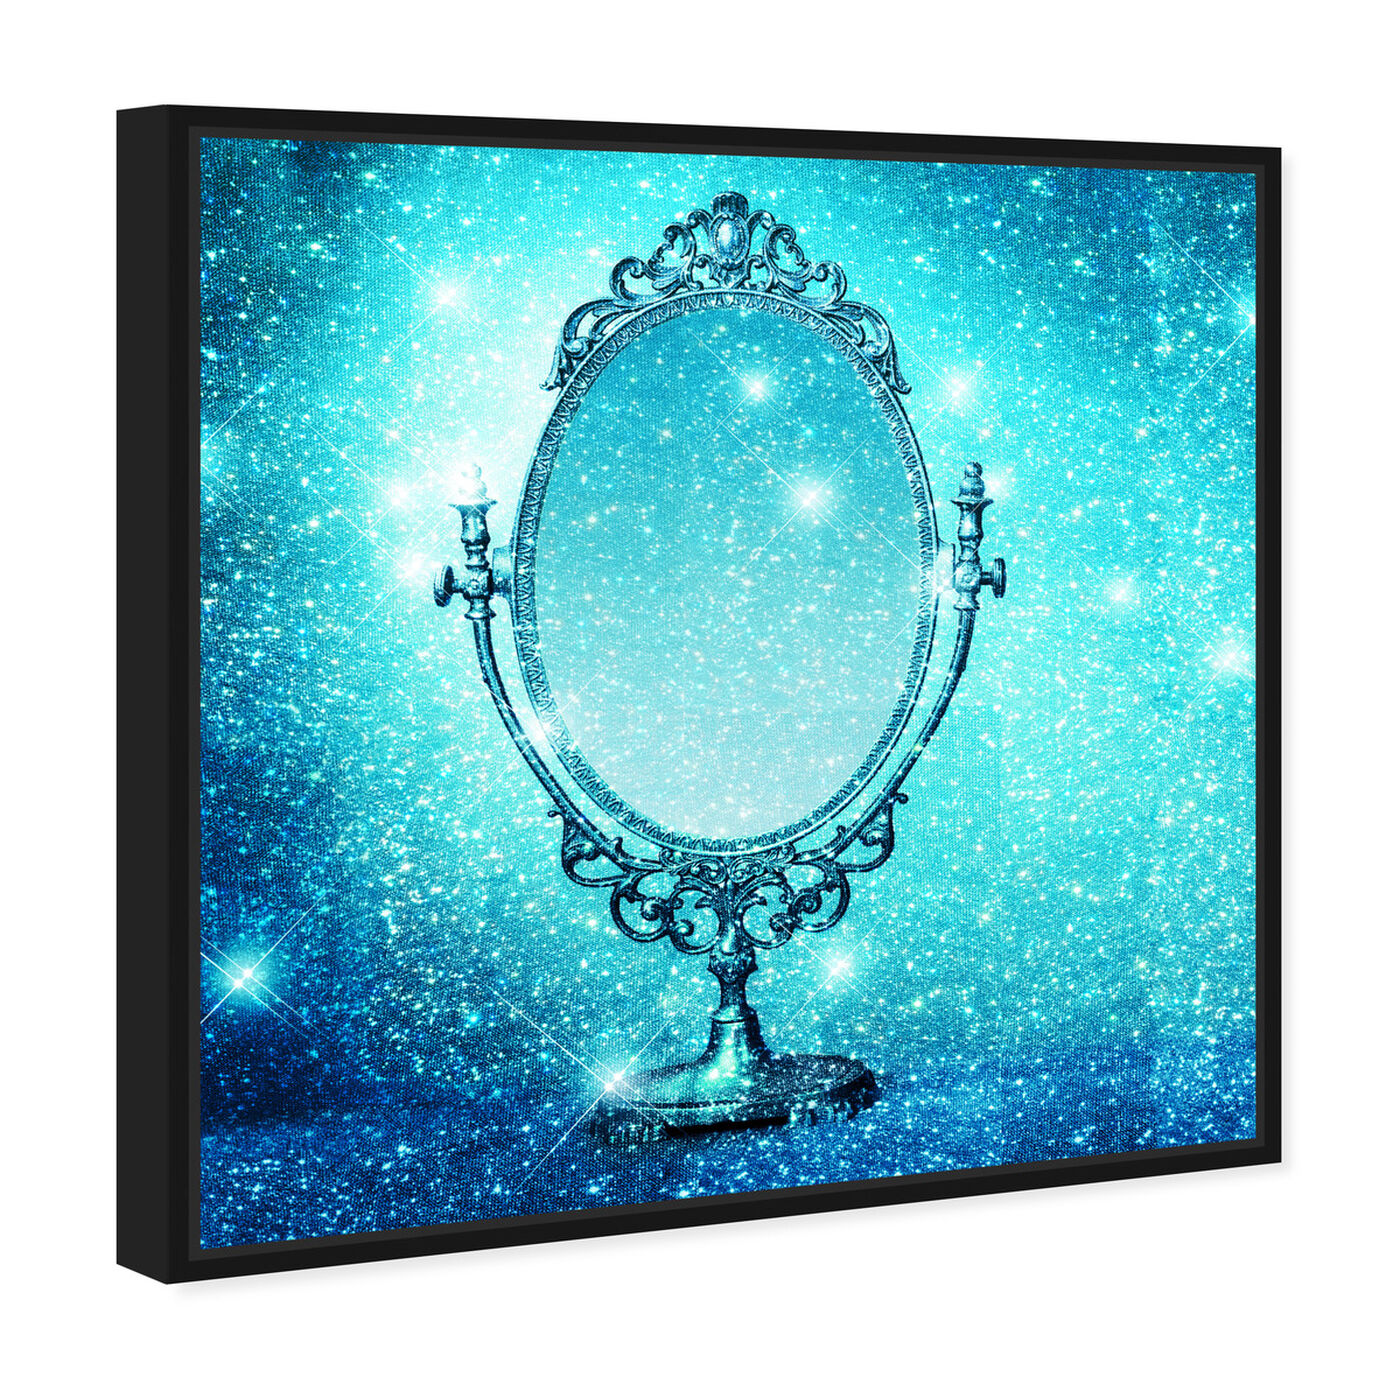 Angled view of Mirror Mirror featuring fashion and glam and makeup art.